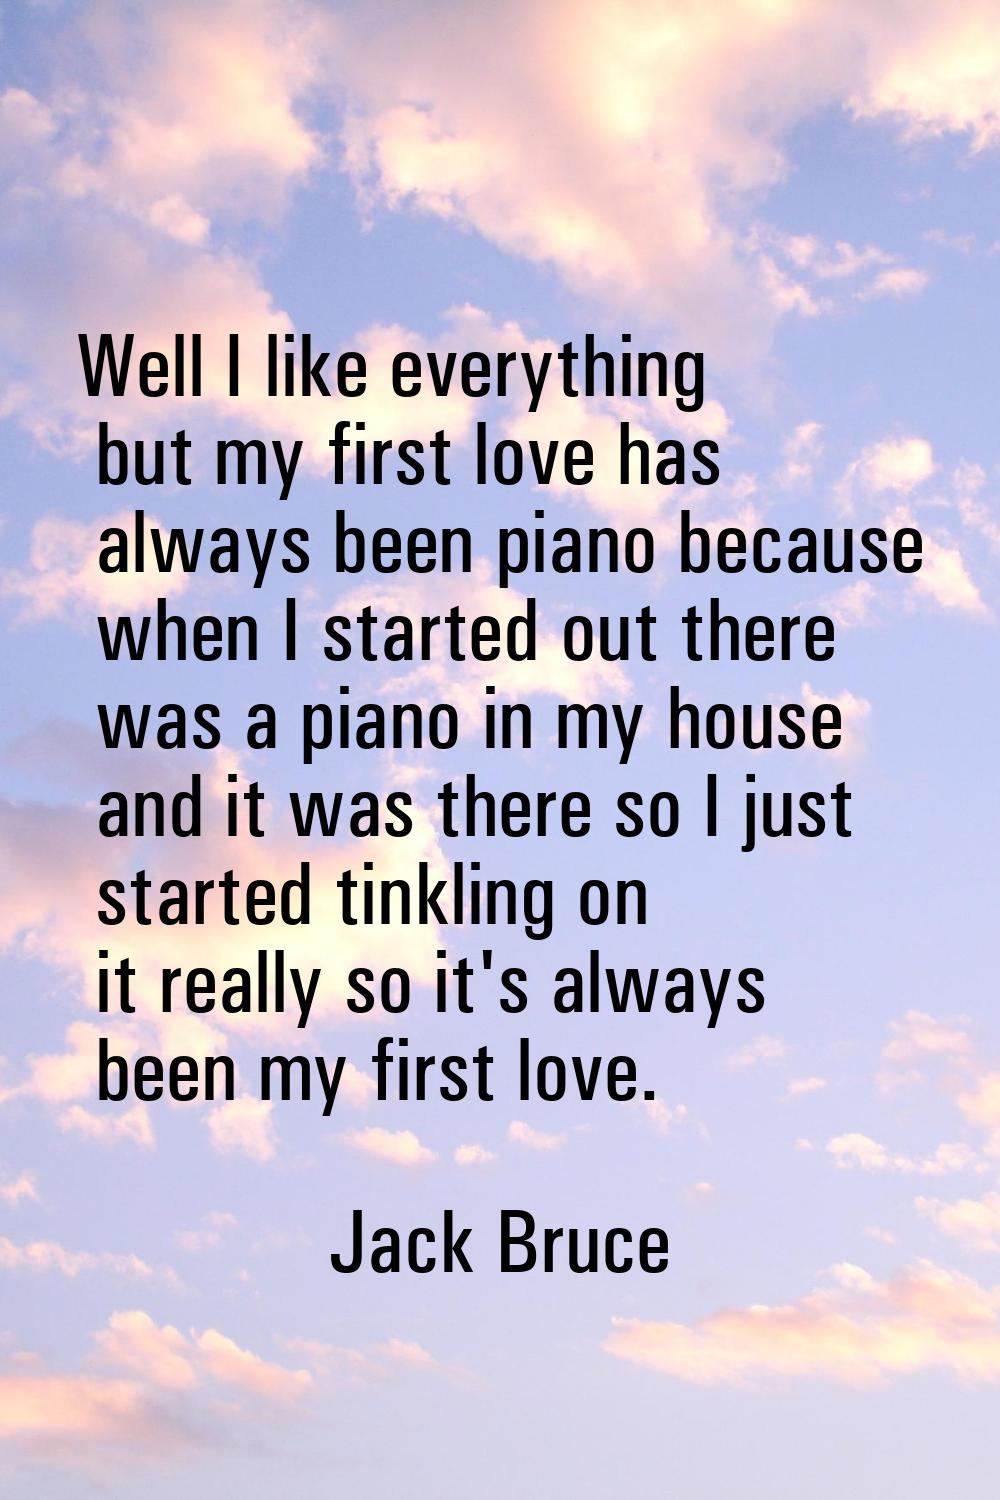 Well I like everything but my first love has always been piano because when I started out there was